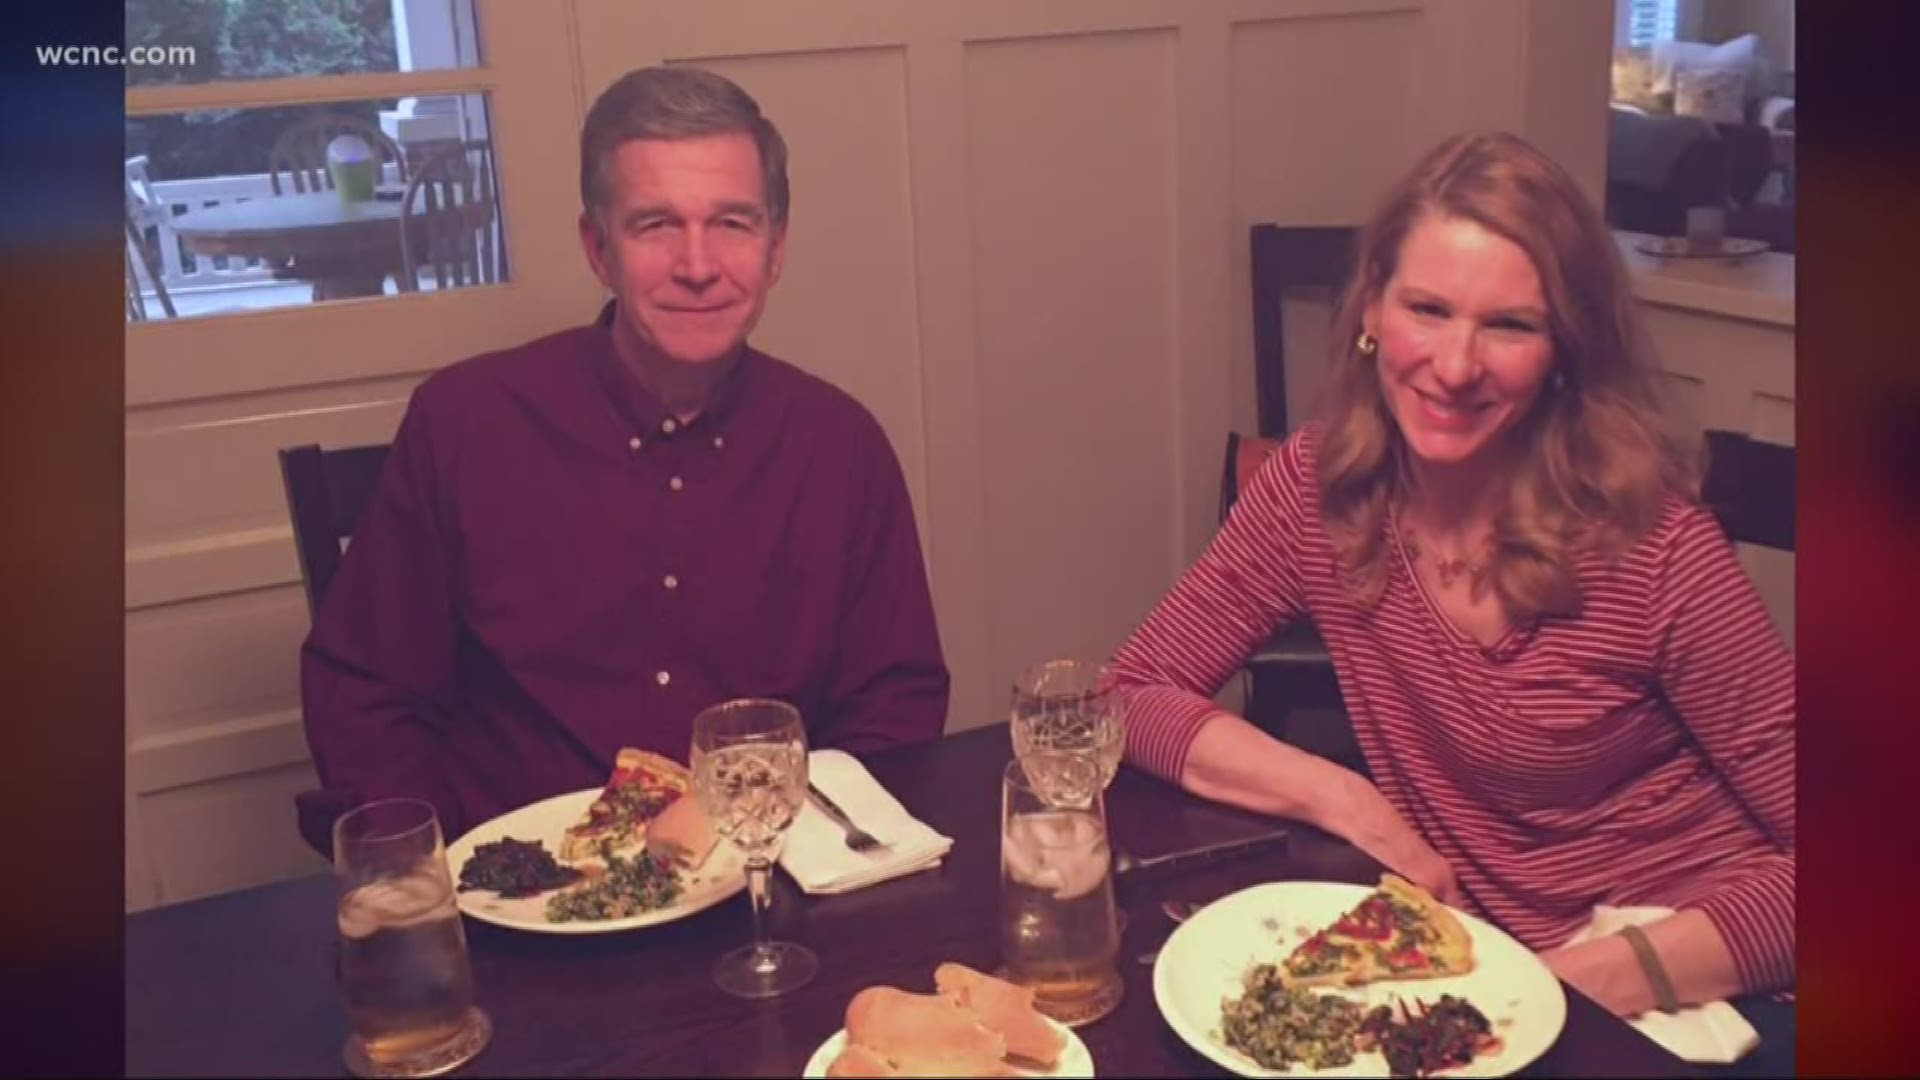 The couple stayed home for their wedding anniversary, opting for a home-cooked meal. It comes just days before the state's stay at home order.